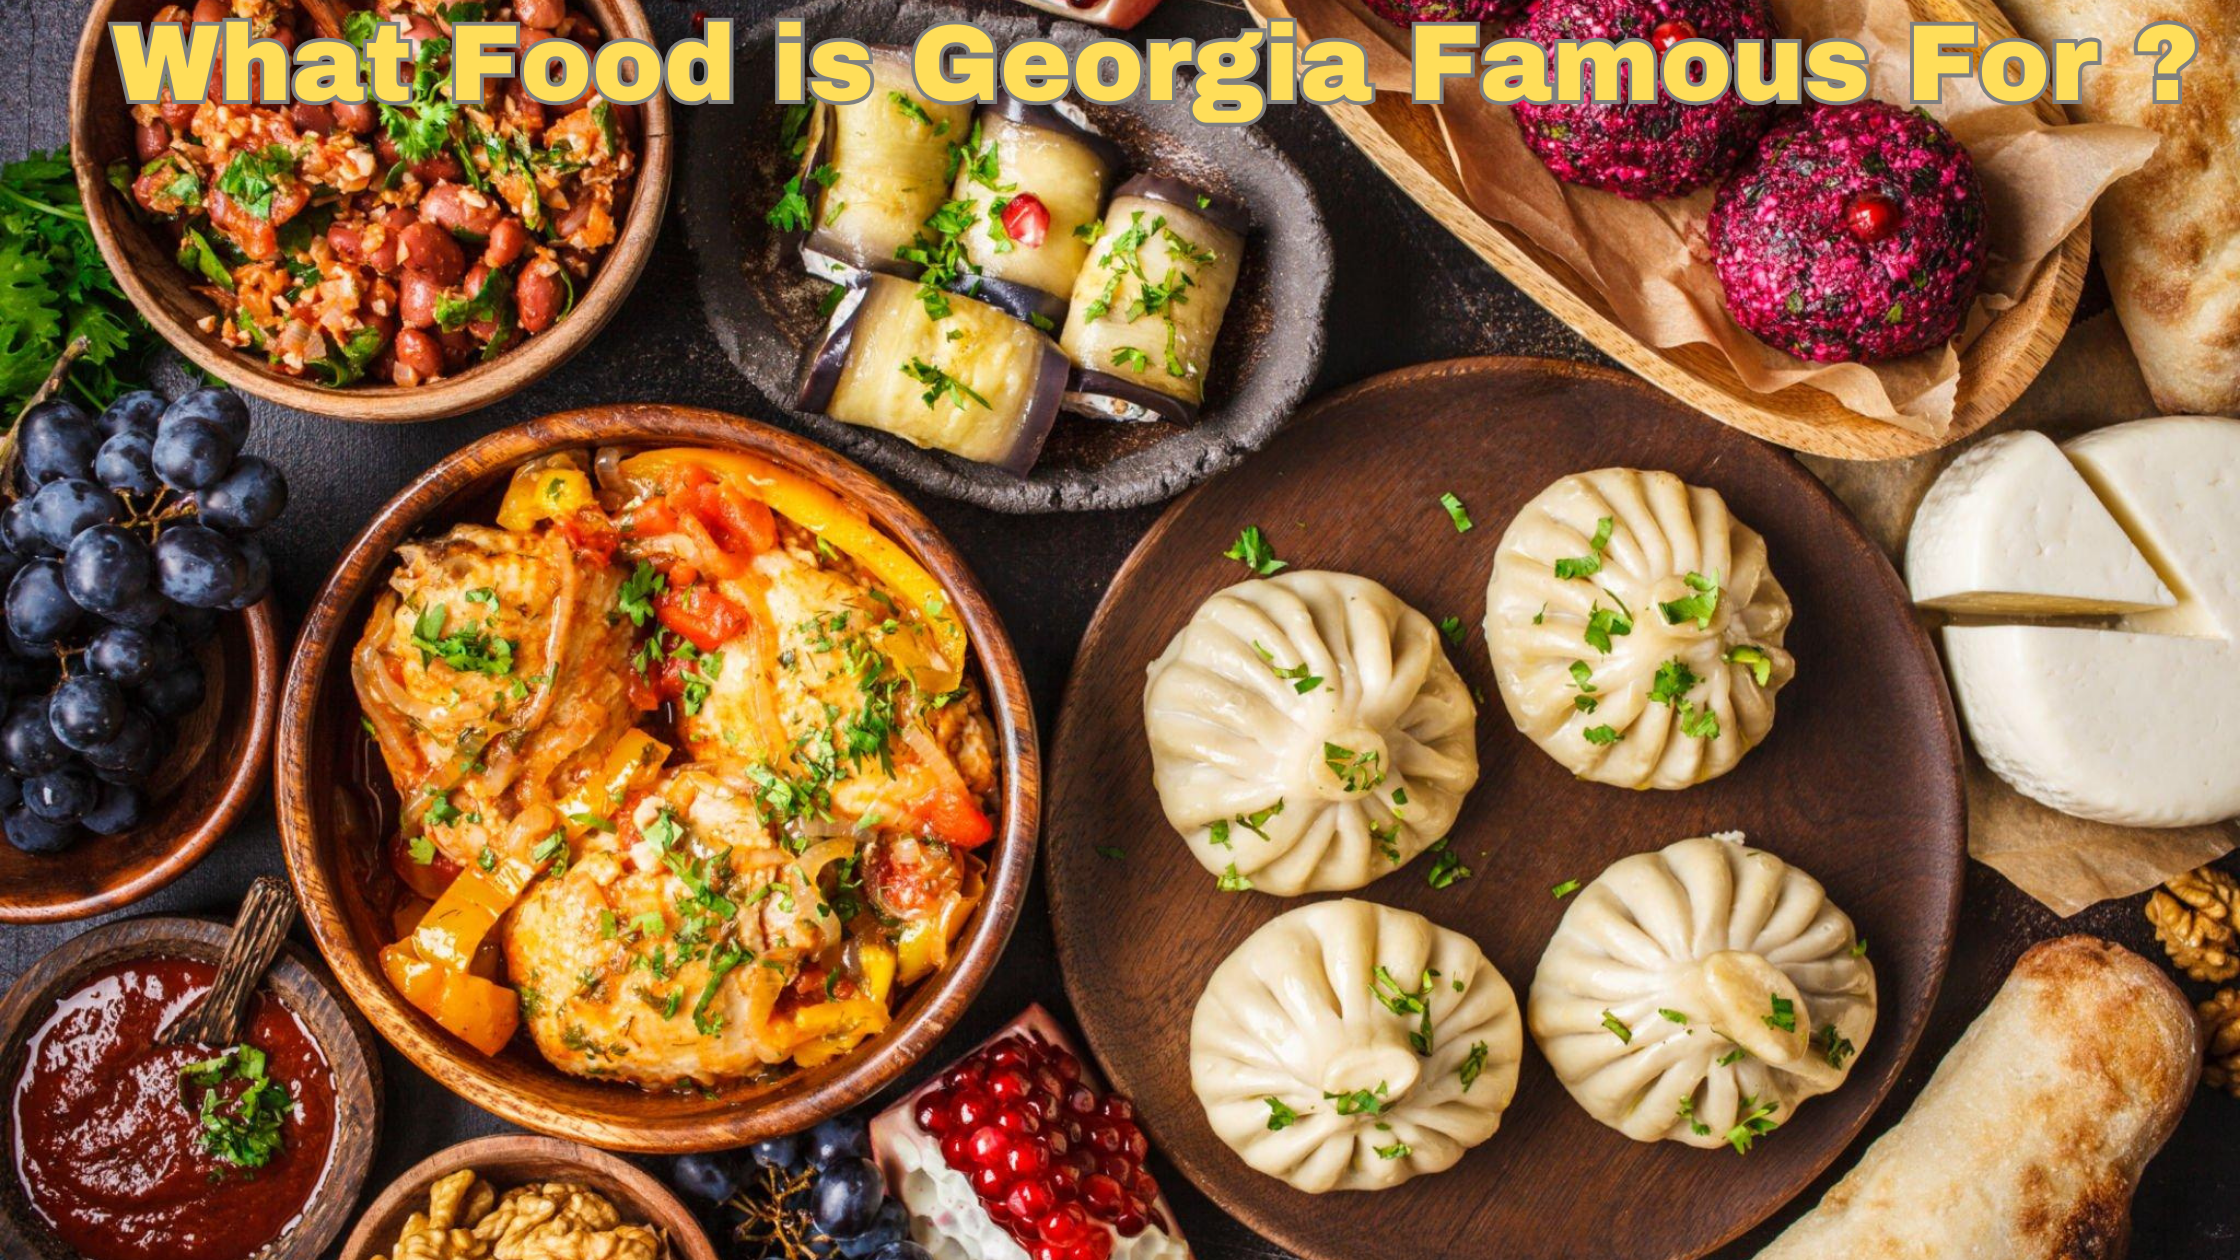 What Food is Georgia Famous For